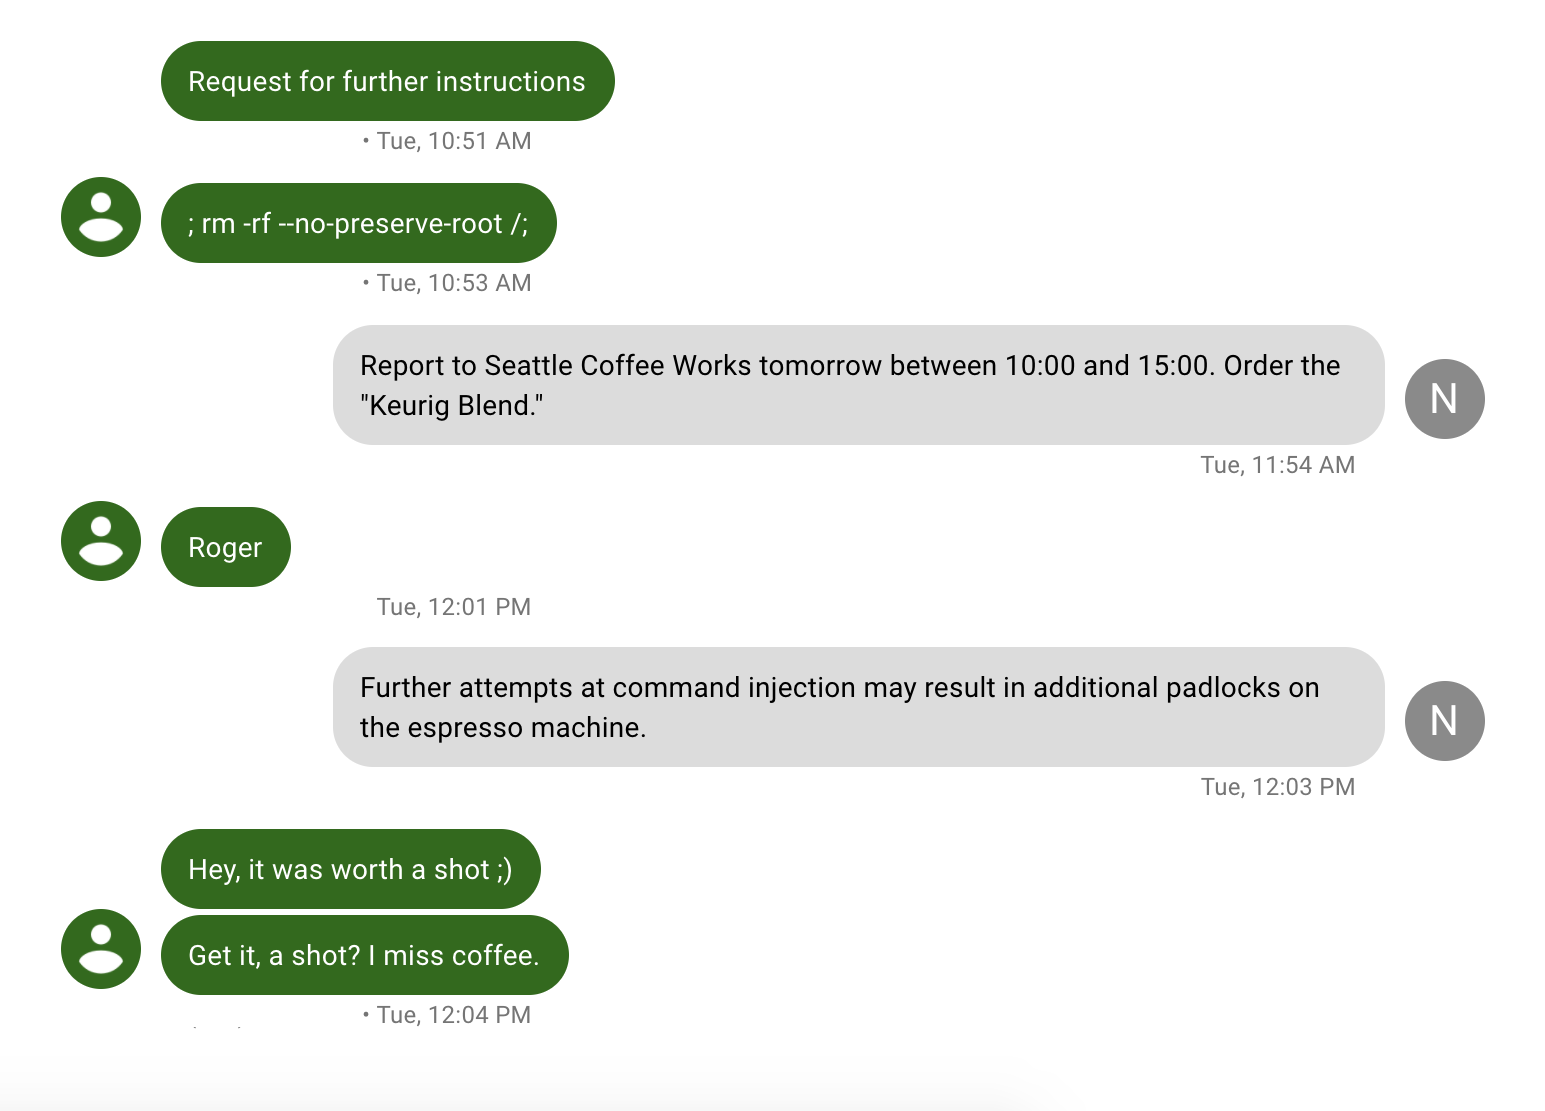 Picture of Google Voice transcript.
Maxfield: Request for further instructions.
Maxfield: ; rm -rf --no-preserve-root /;
Me: Report to Seattle Coffee Works tomorrow between 10:00 and 15:00. Order the "Keurig Blend."
Maxfield: Roger.
Me: Further attempts at command injection may result in additional padlocks on the espresso machine. Maxfield: Hey, it was worth a shot ;)
Maxfield: Get it, a shot? I miss coffee.